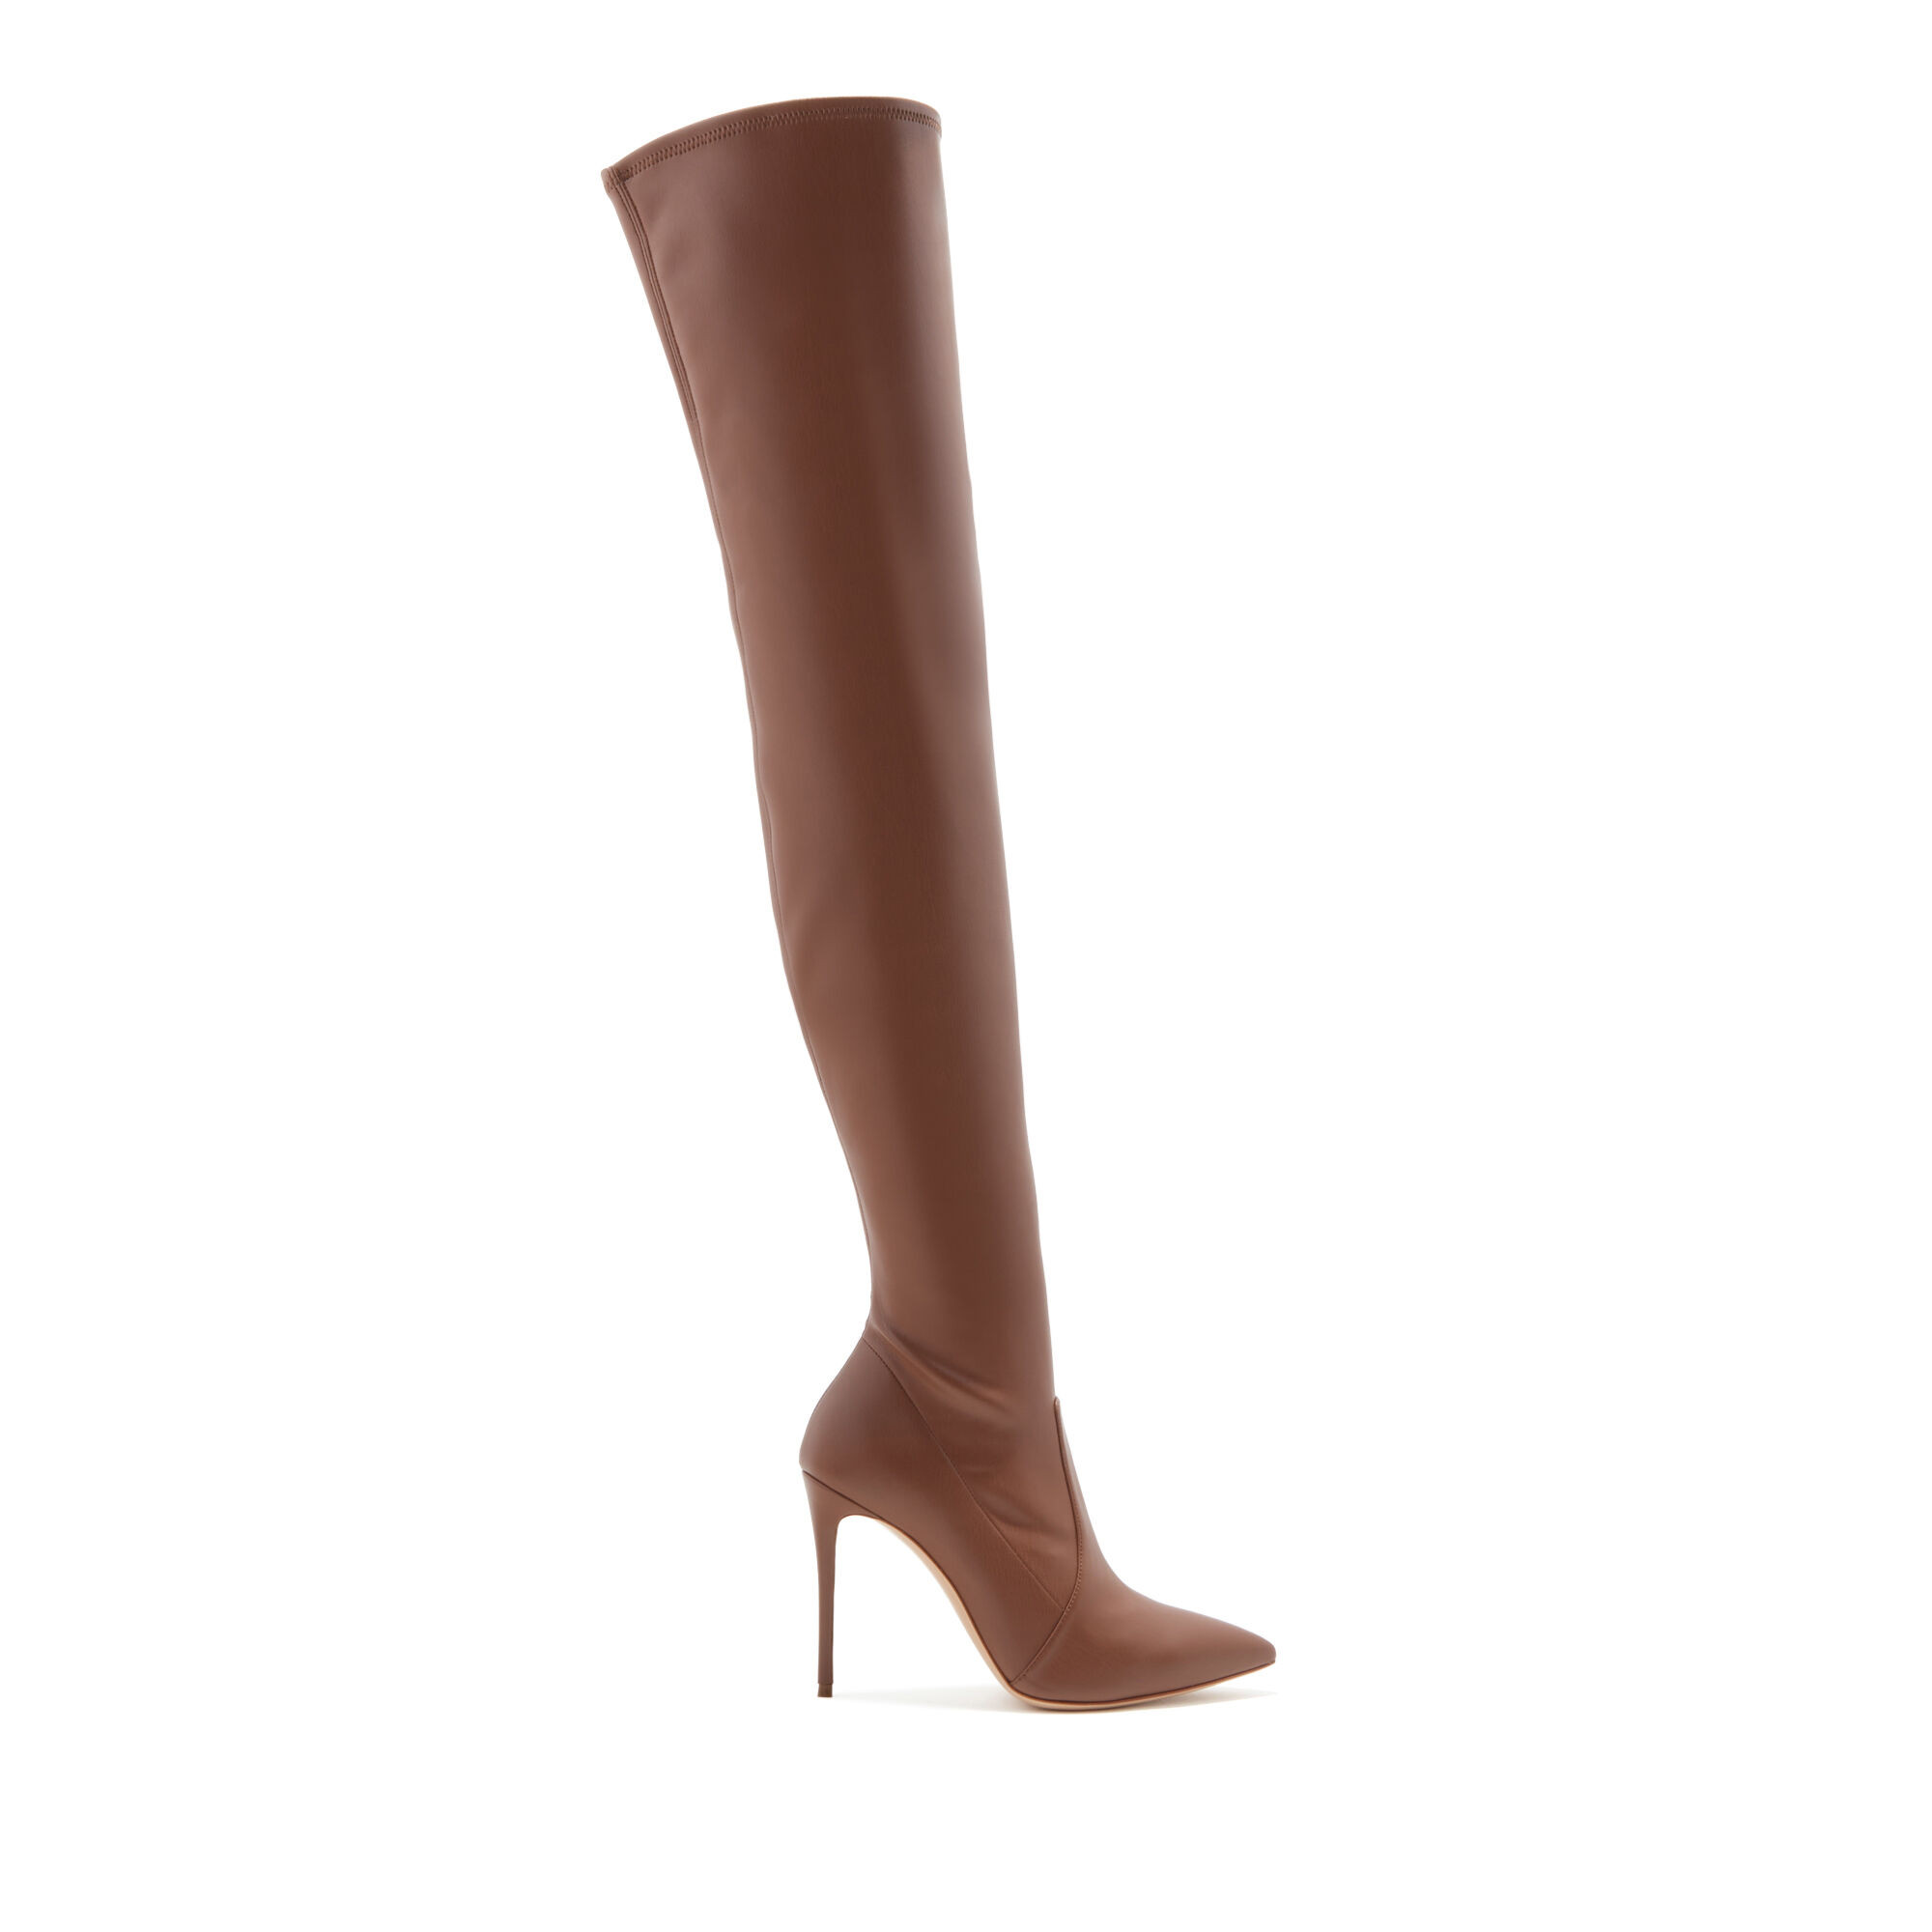 Julia Over The Knee Boots in Brown